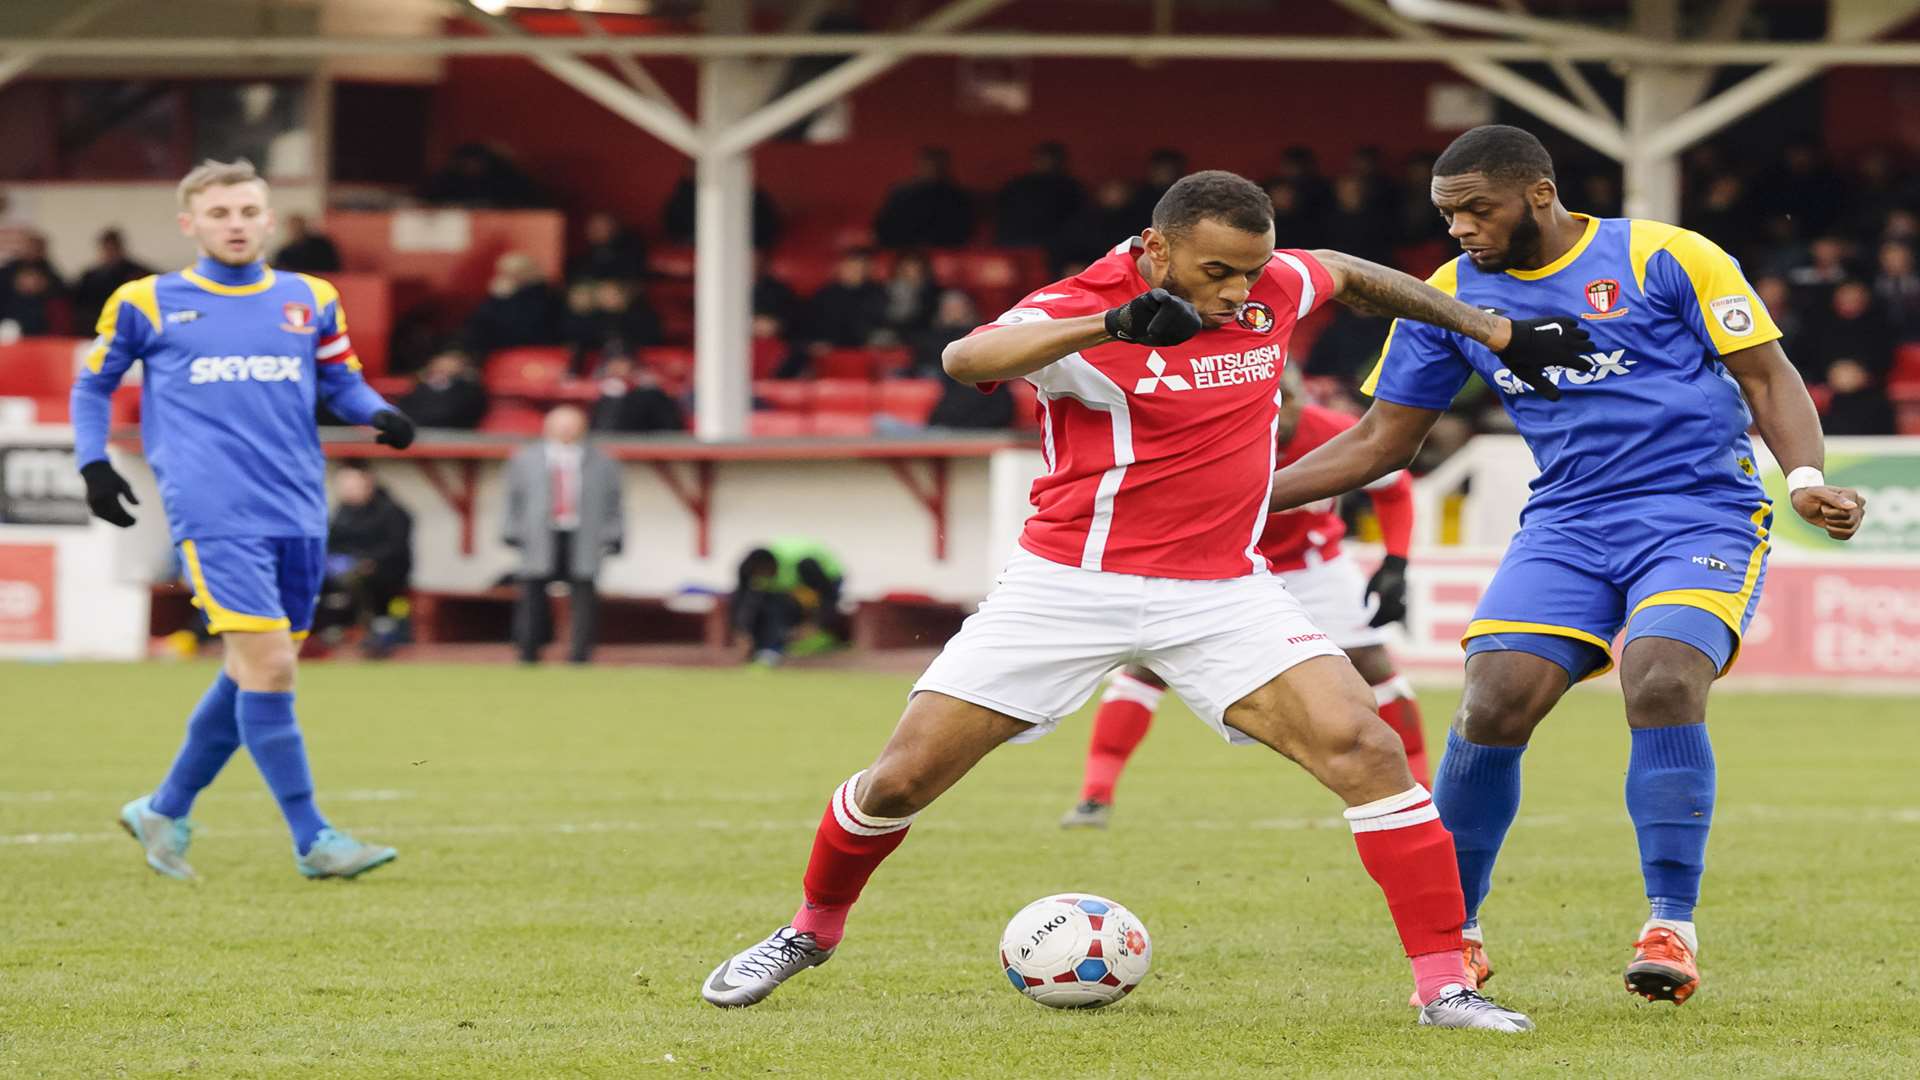 Danny Haynes on the ball for Ebbsfleet after coming off the bench Picture: Andy Payton